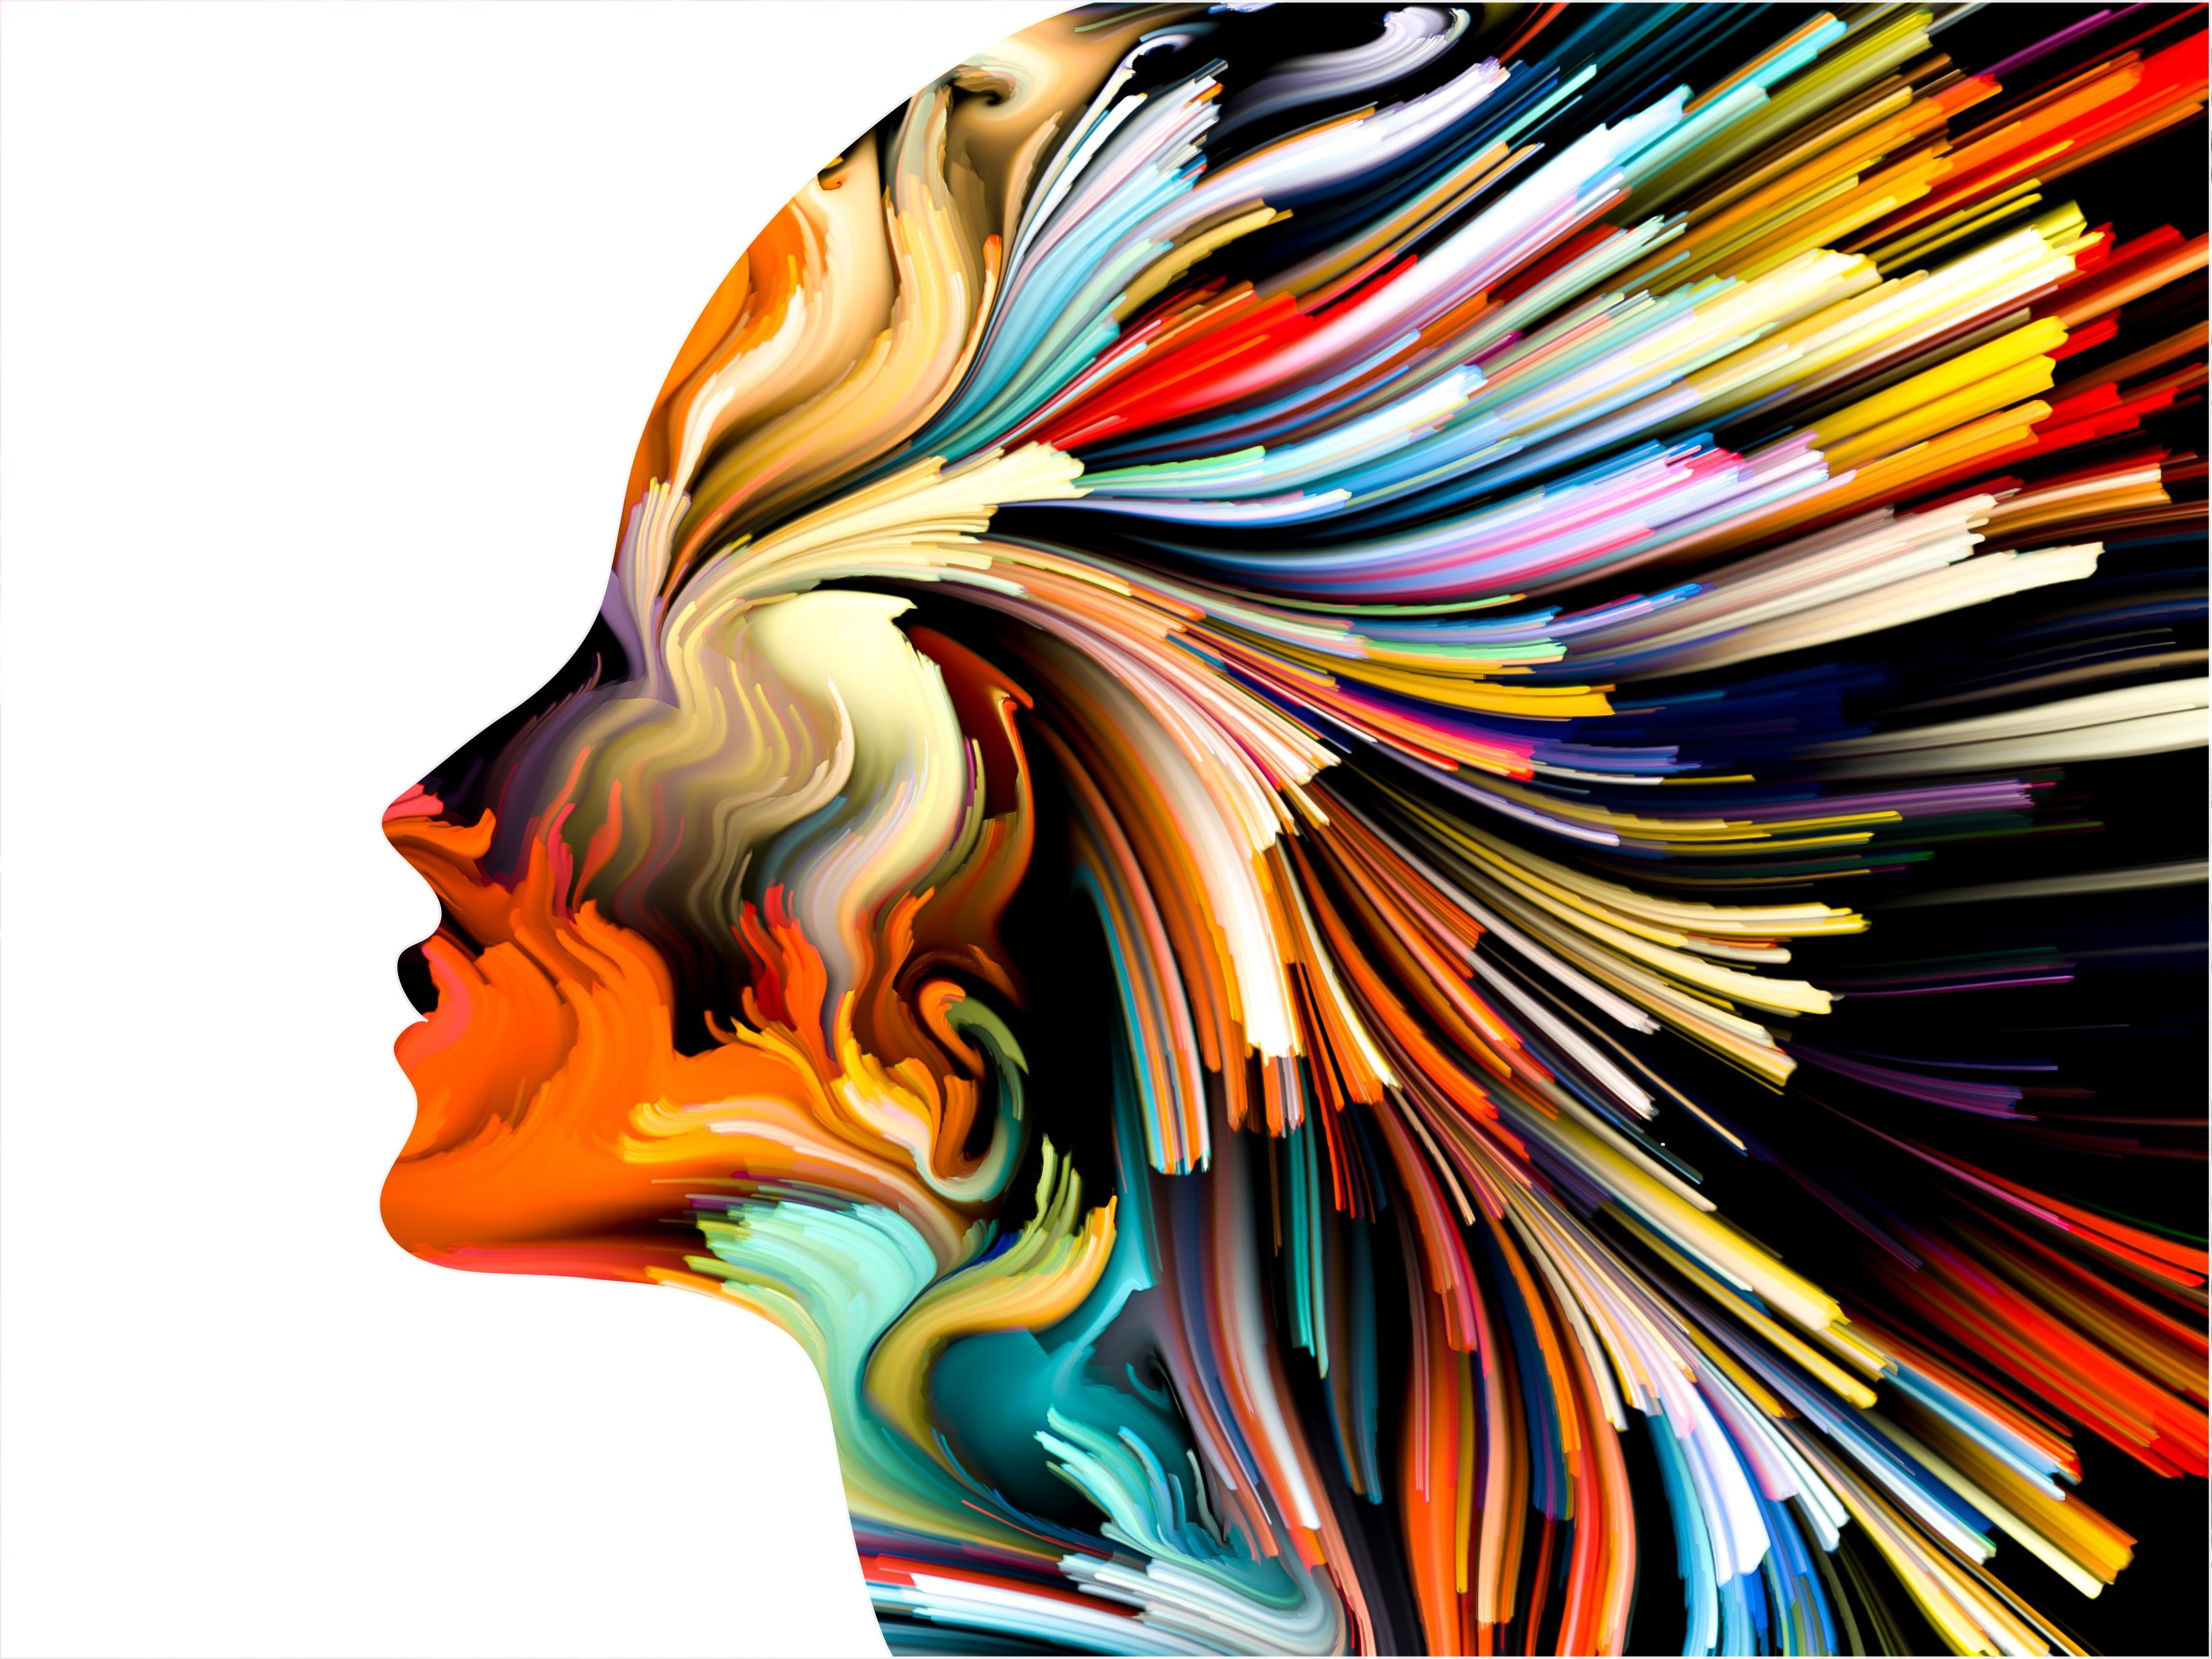 #colorful, #women, #abstract, #profile, #white background, #artwork, wallpaper. Mocah.org HD Wallpaper